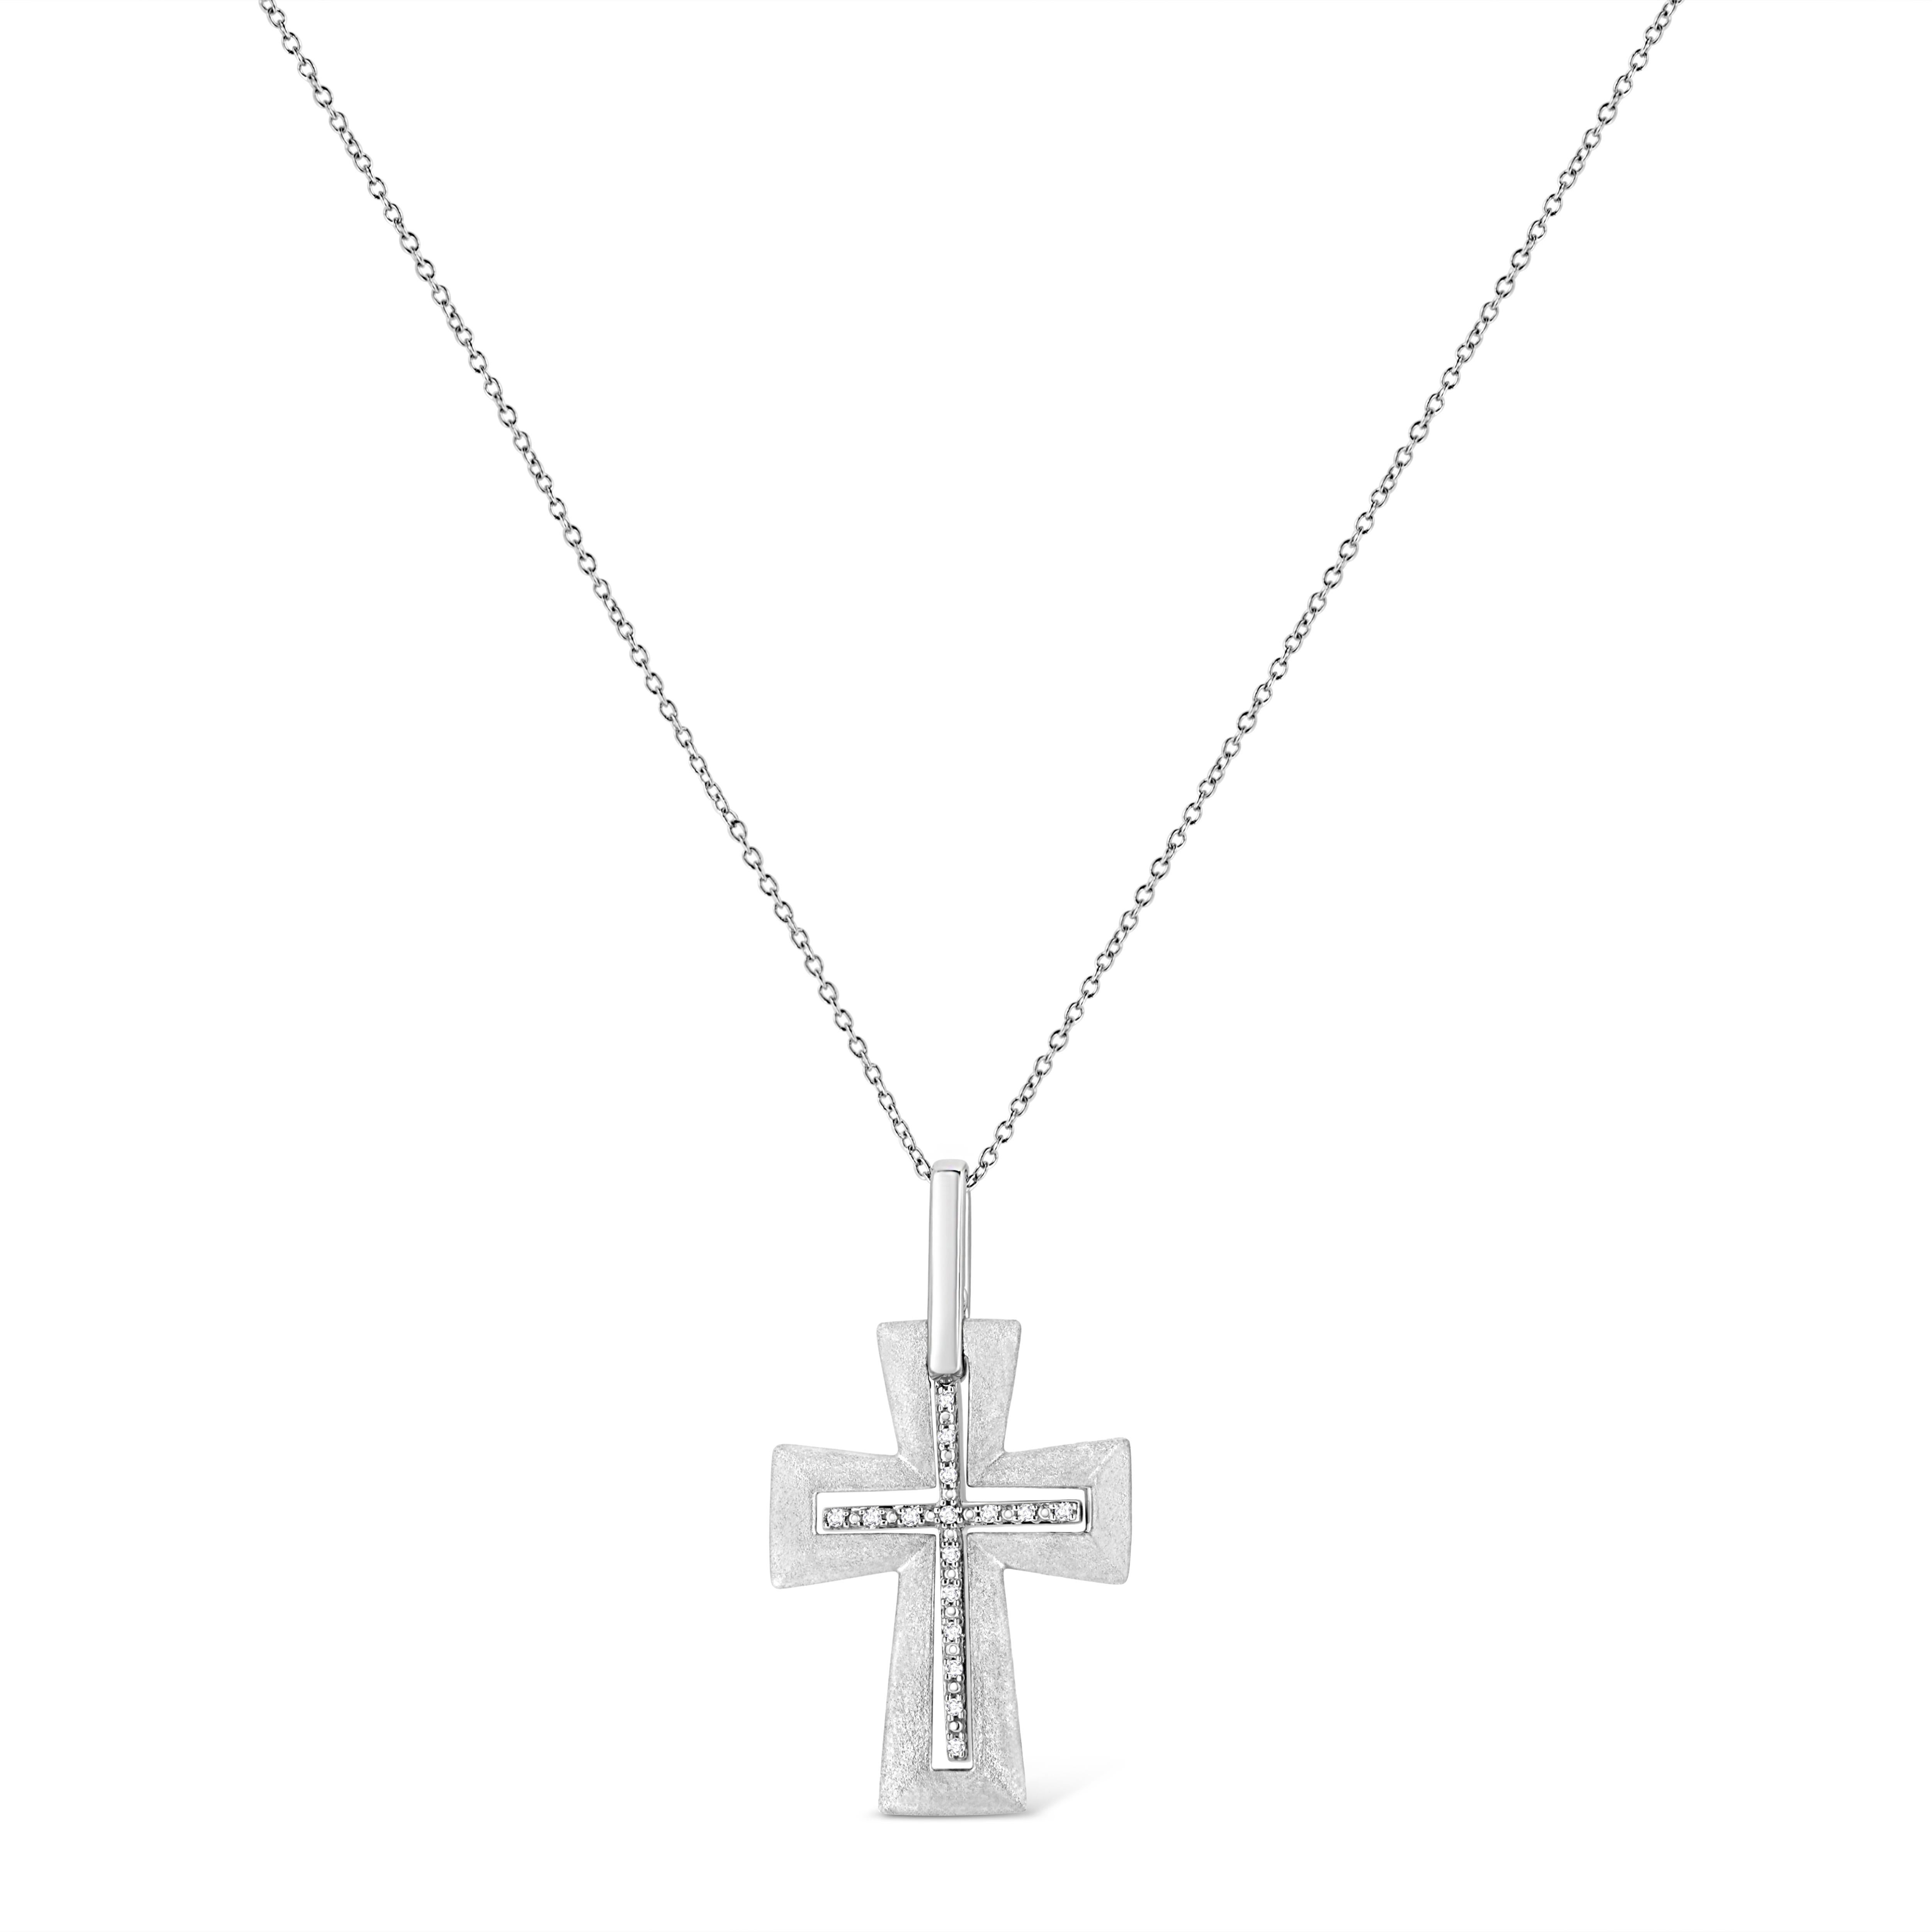 This religious diamond cross Pendant is a glistening symbol of faith. Styled in gleaming sterling silver this pendant is adorned with 16 radiant prong set round cut diamonds arranged around the cross. It dangles from a elegant cable chain. Total